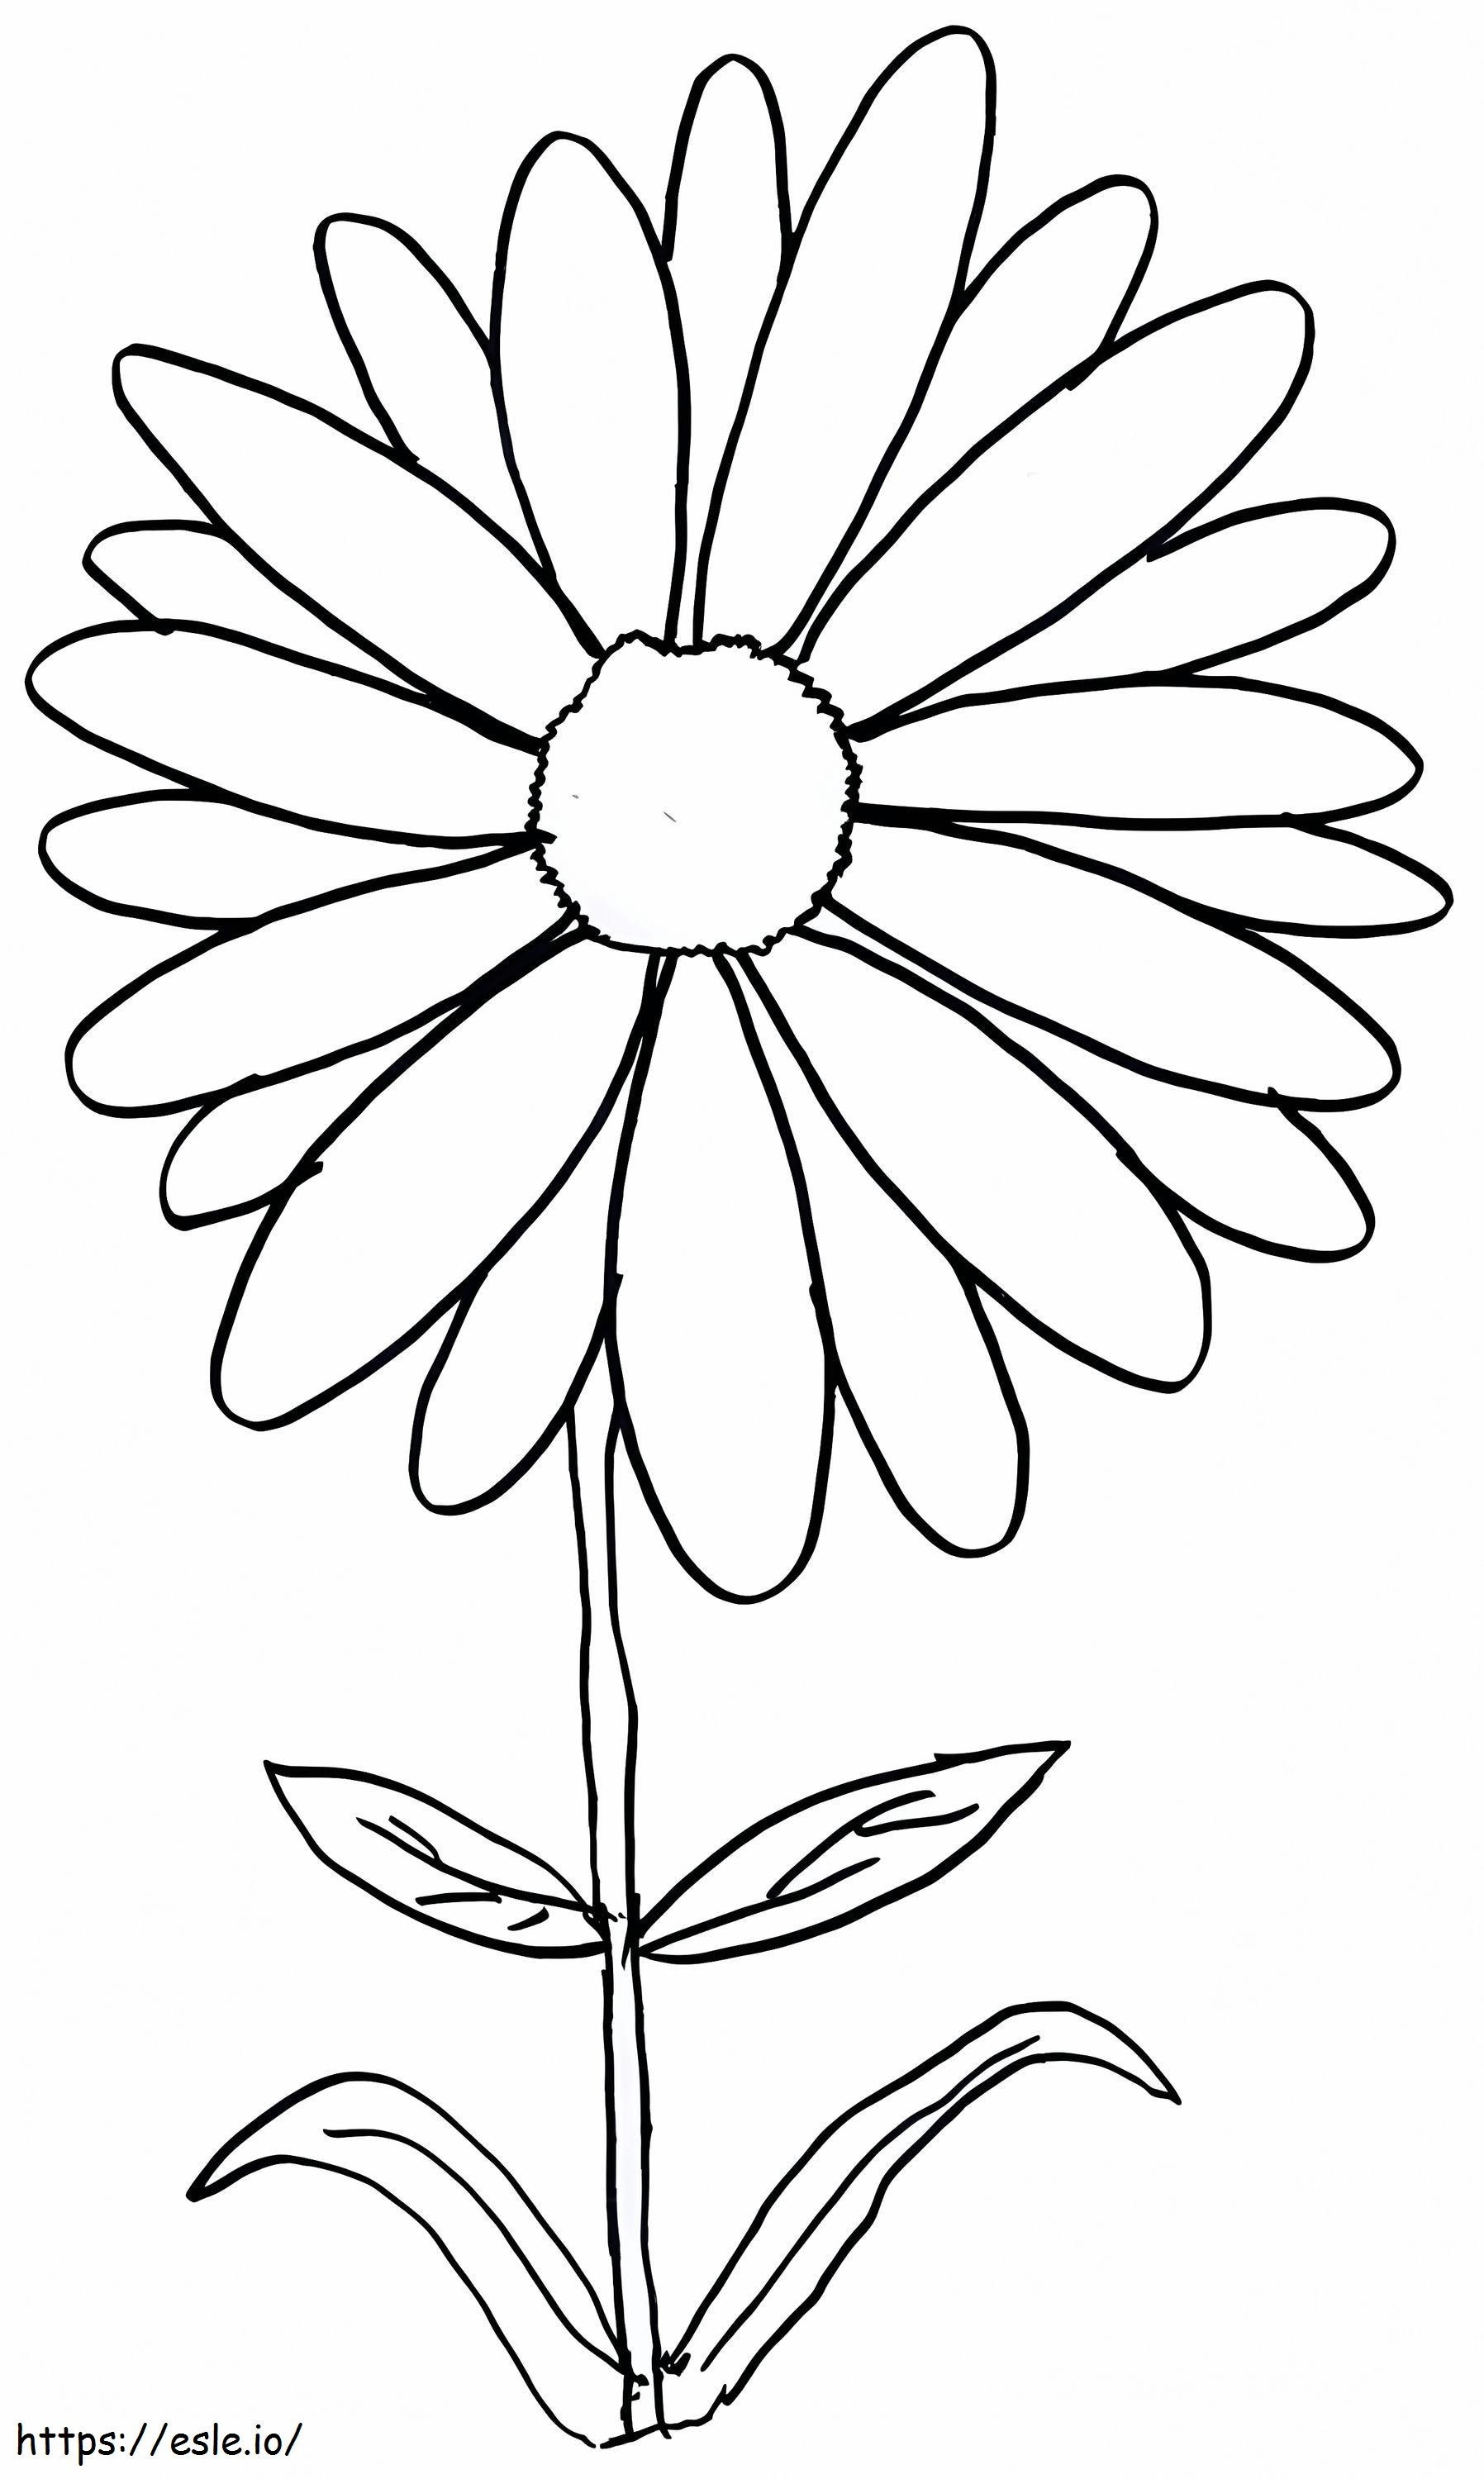 Stunning Daisy coloring page